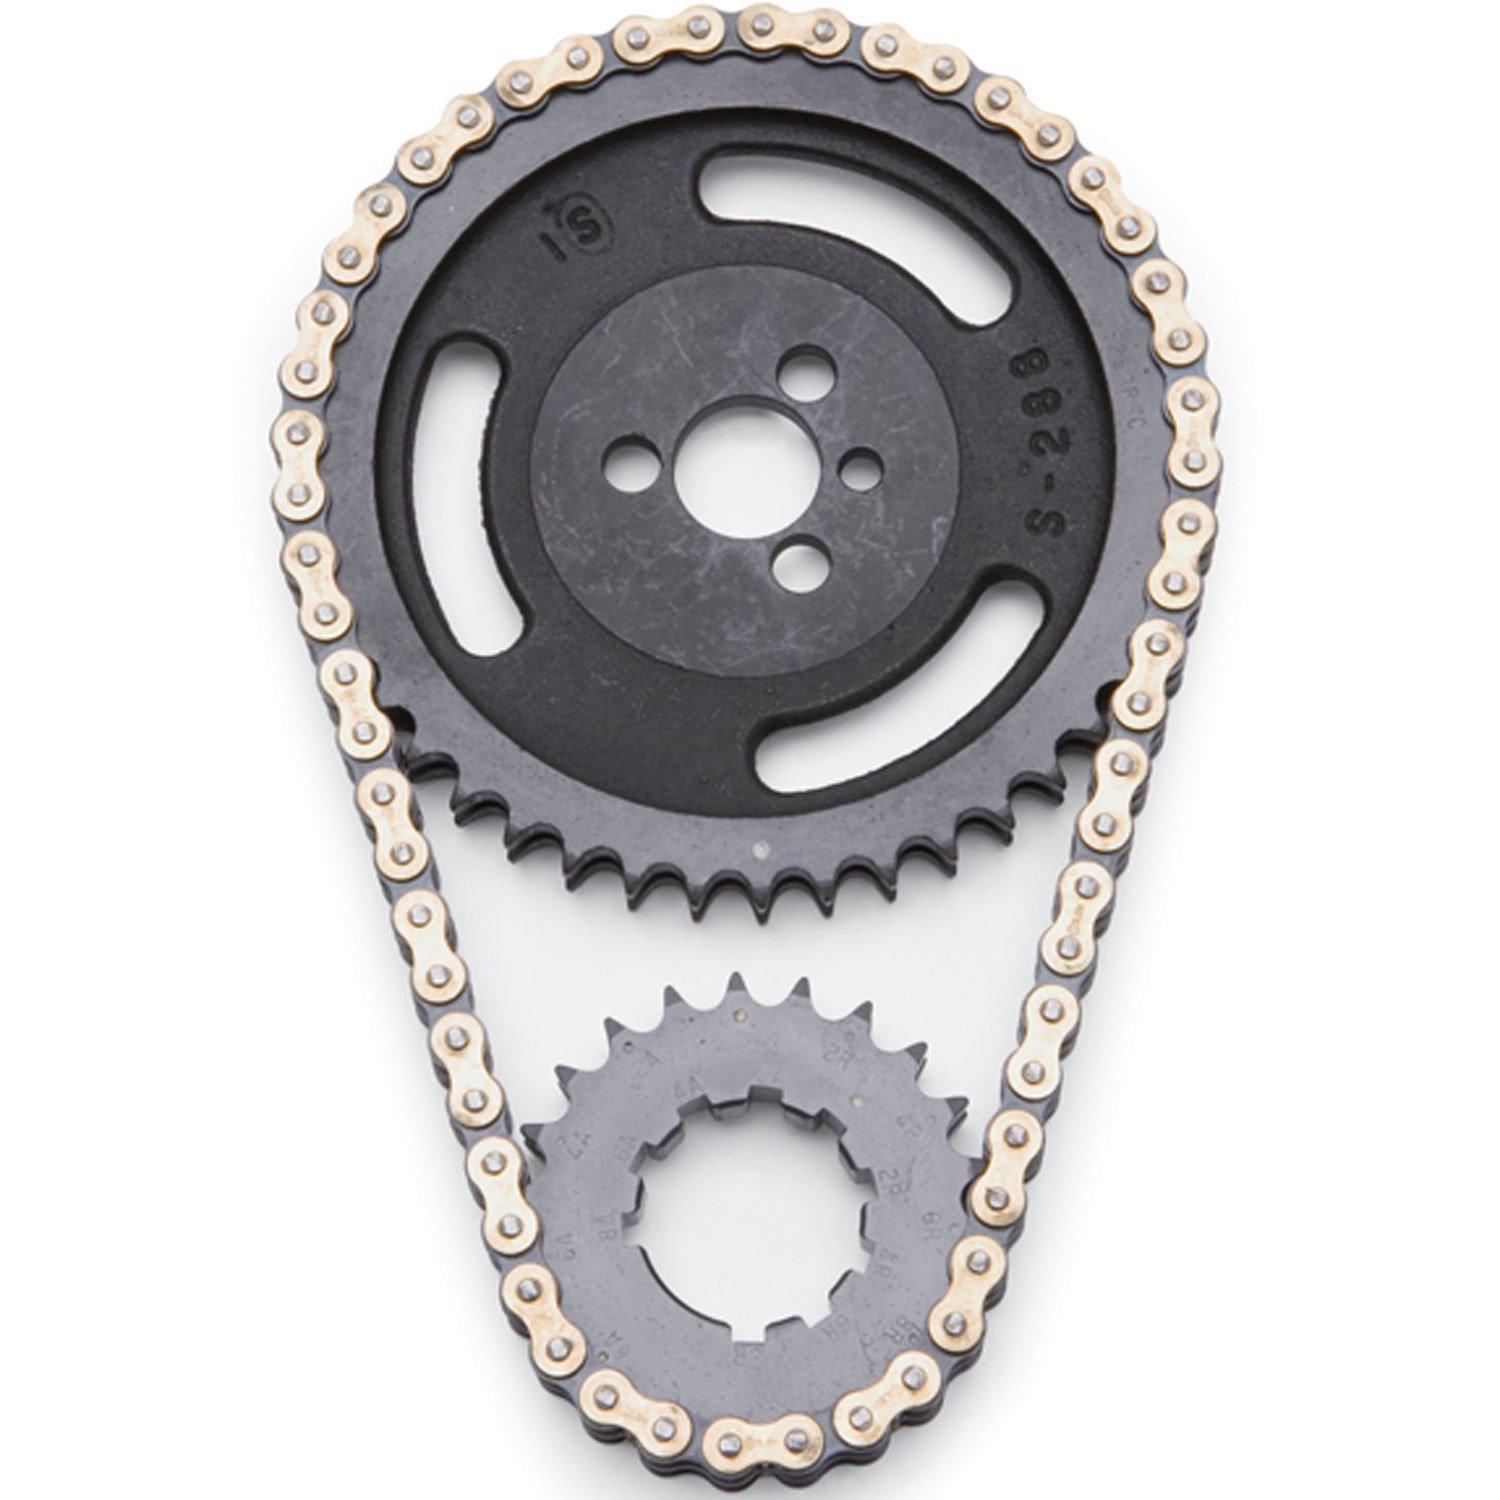 Victor-Link Timing Chain Set for 1955-1986 Small Block Chevy